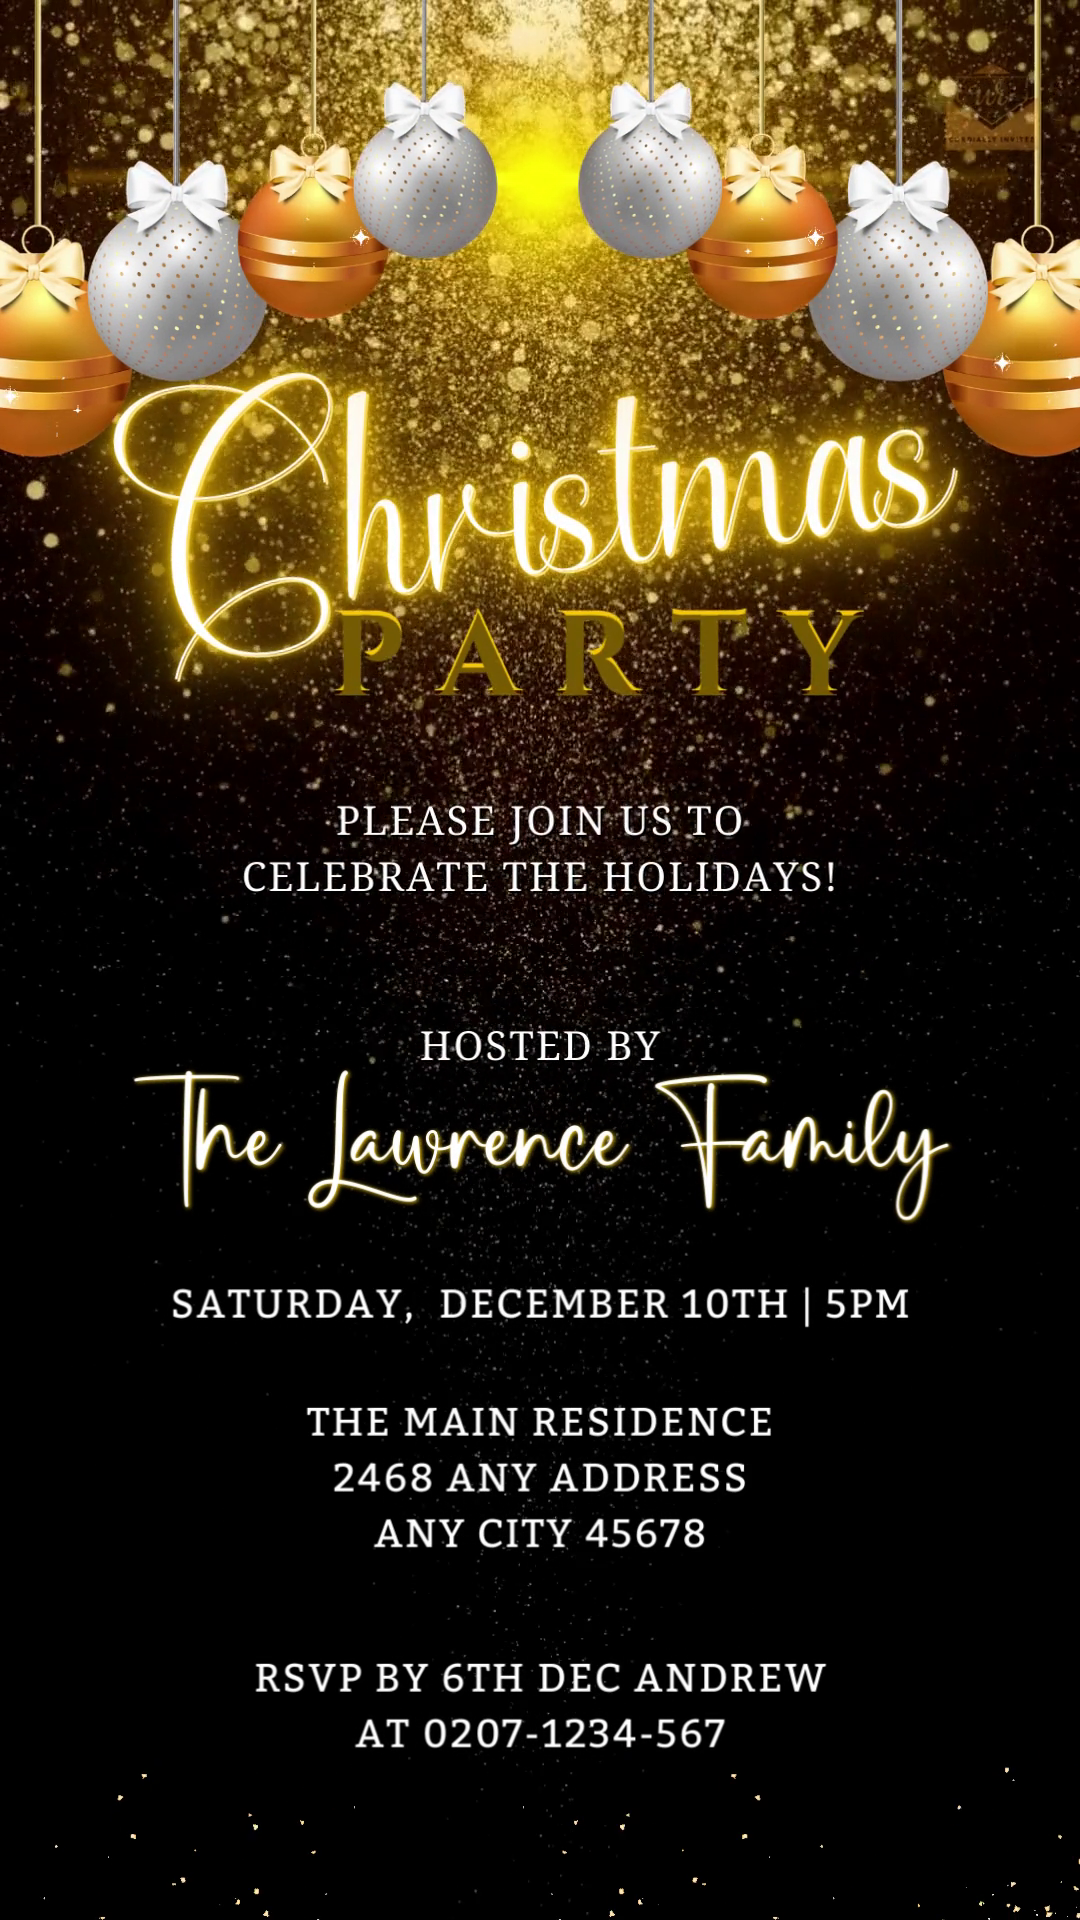 Snowy Gold White Ornaments Glitter Christmas Party Video Invite displayed with festive black and gold design, sparkles, and various holiday decorations.